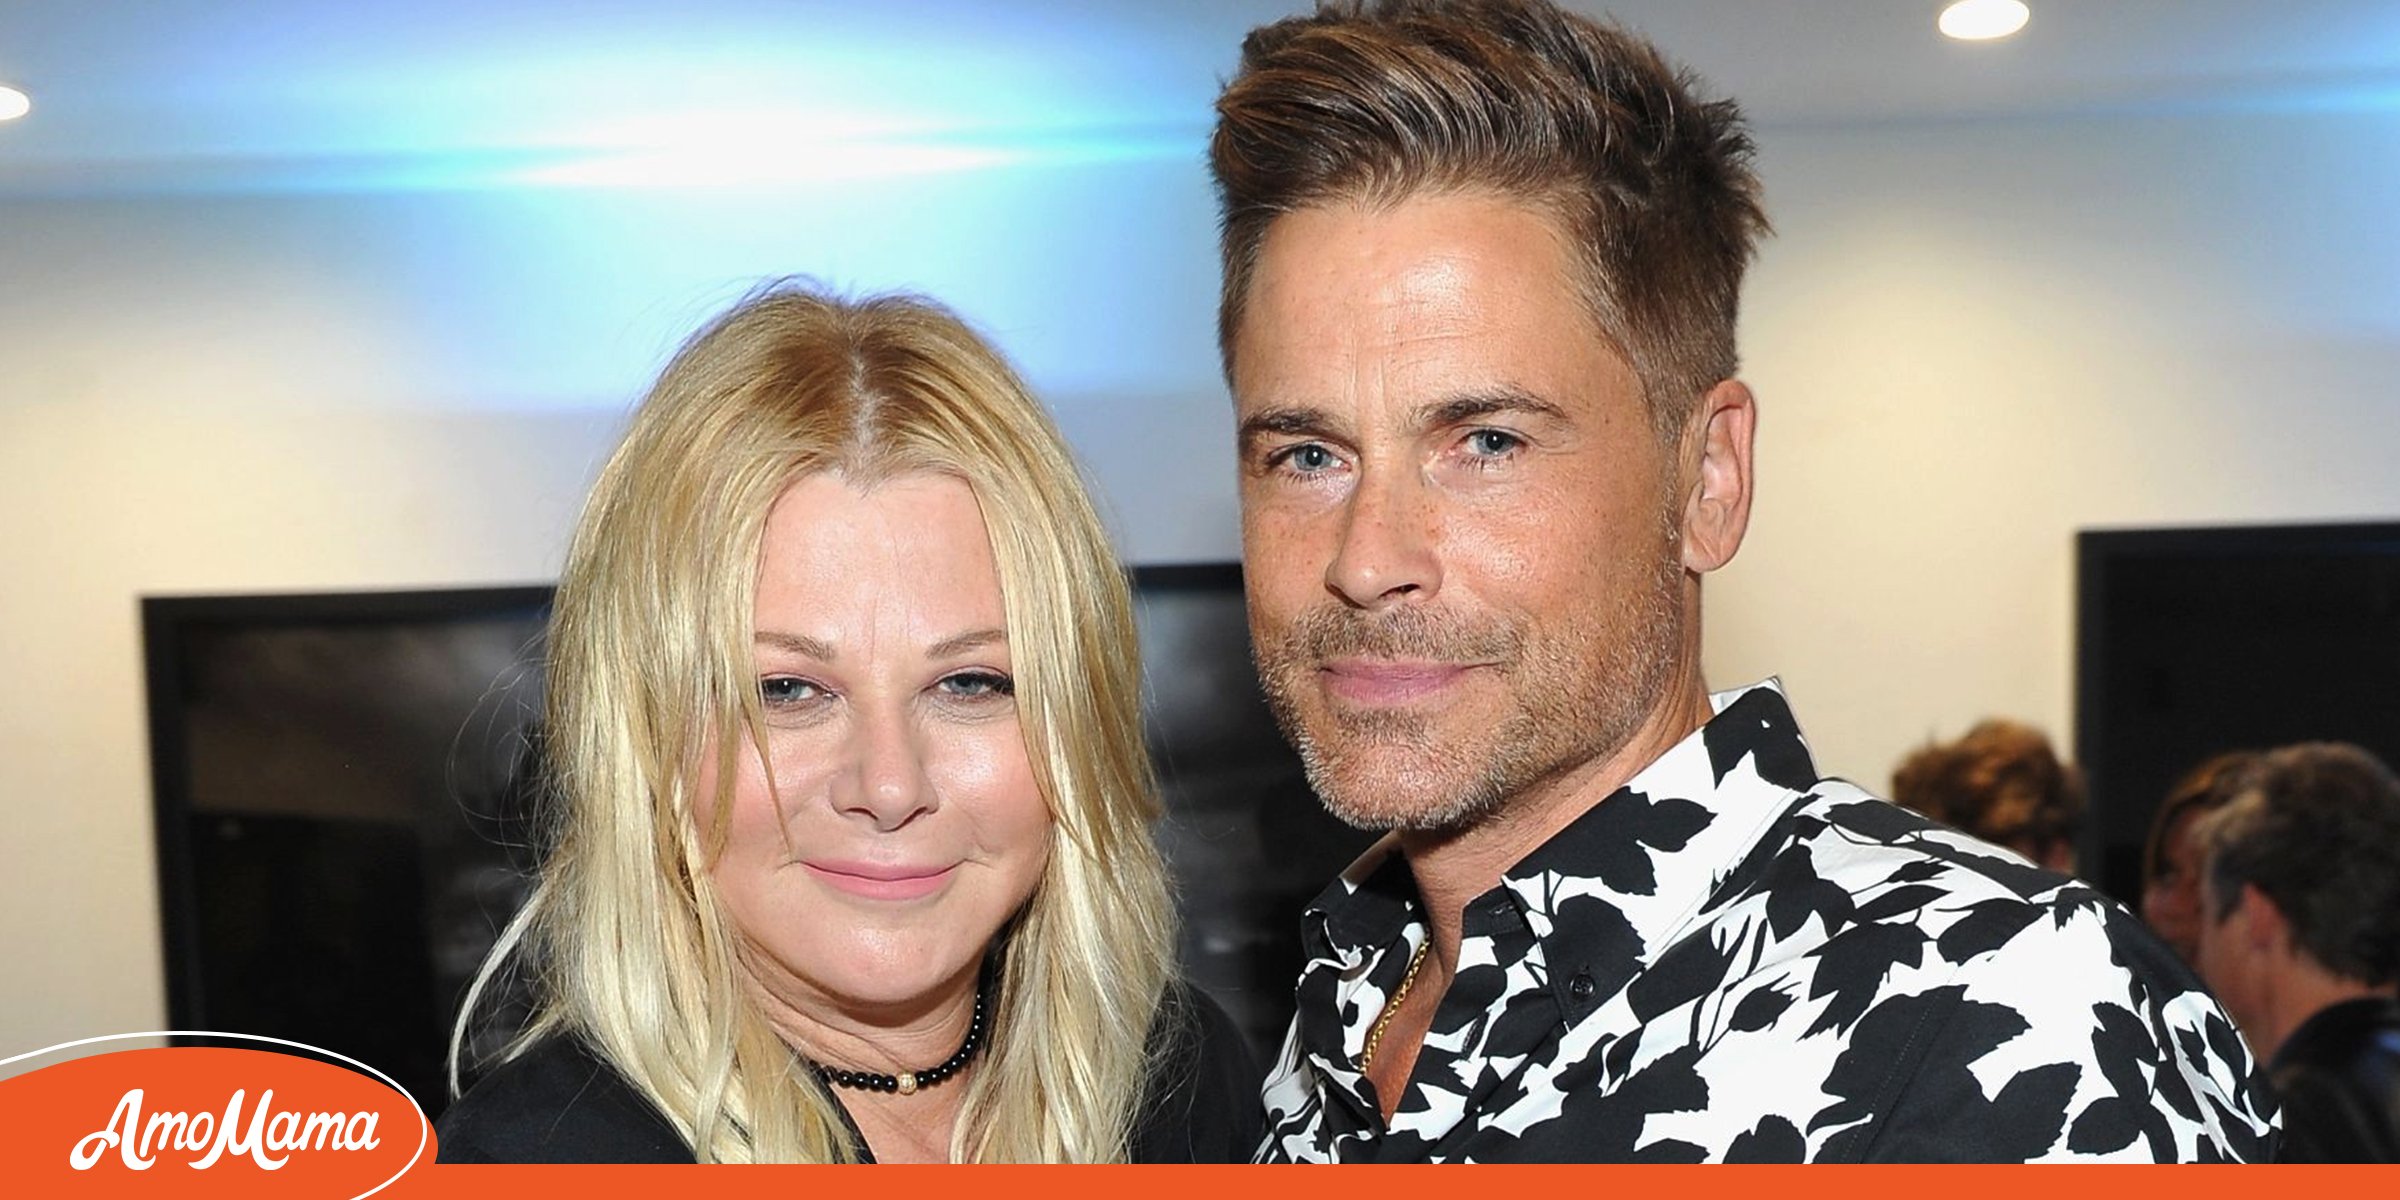 Who Is Rob Lowe’s Wife? All about Sheryl Berkoff and Their Beautiful